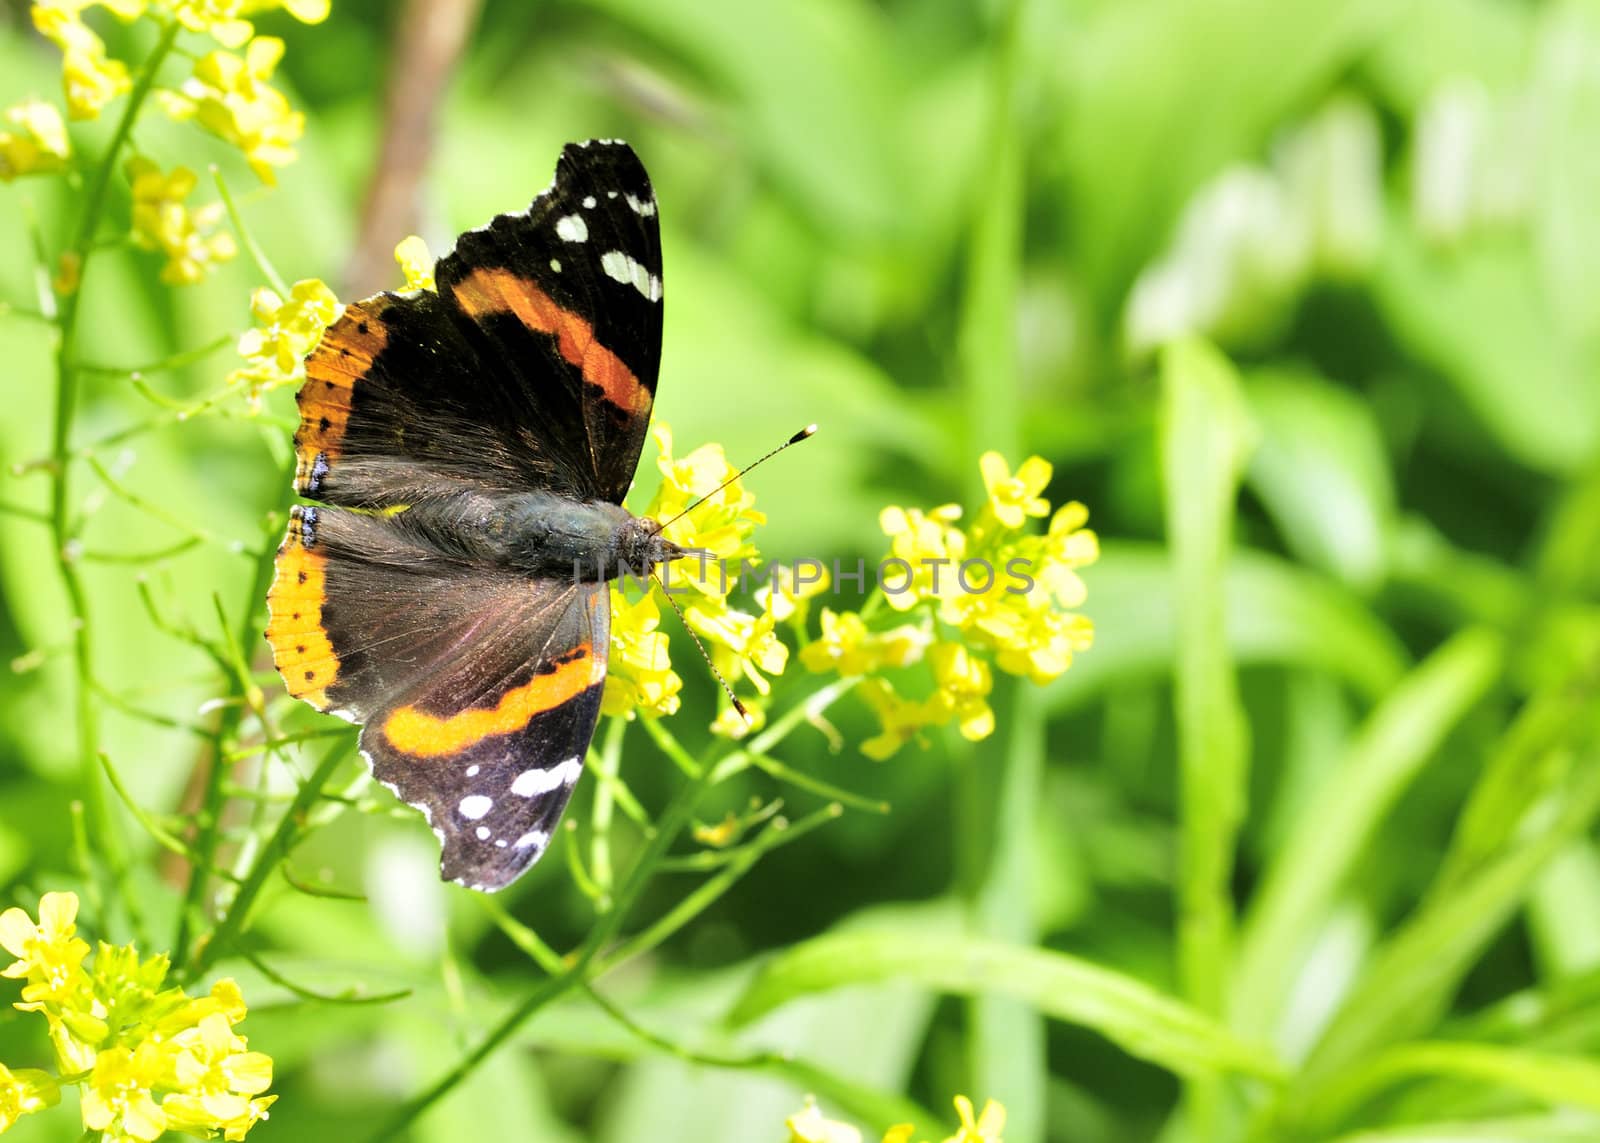 A red admiral butterfly perched on a flower.